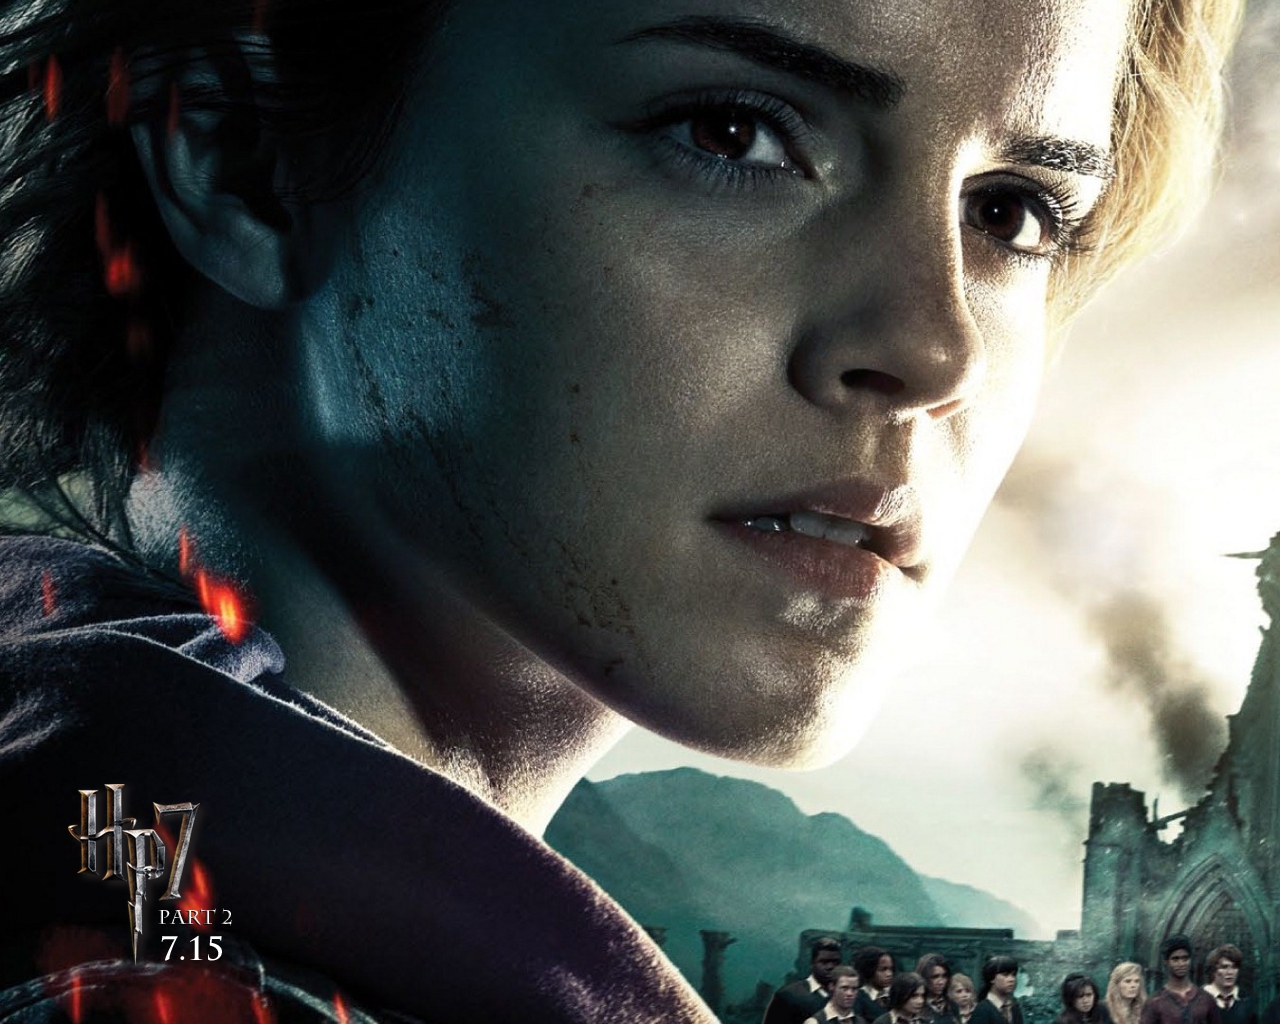 emma watson, movie, harry potter and the deathly hallows: part 2, harry potter and the deathly hallows, hermione granger